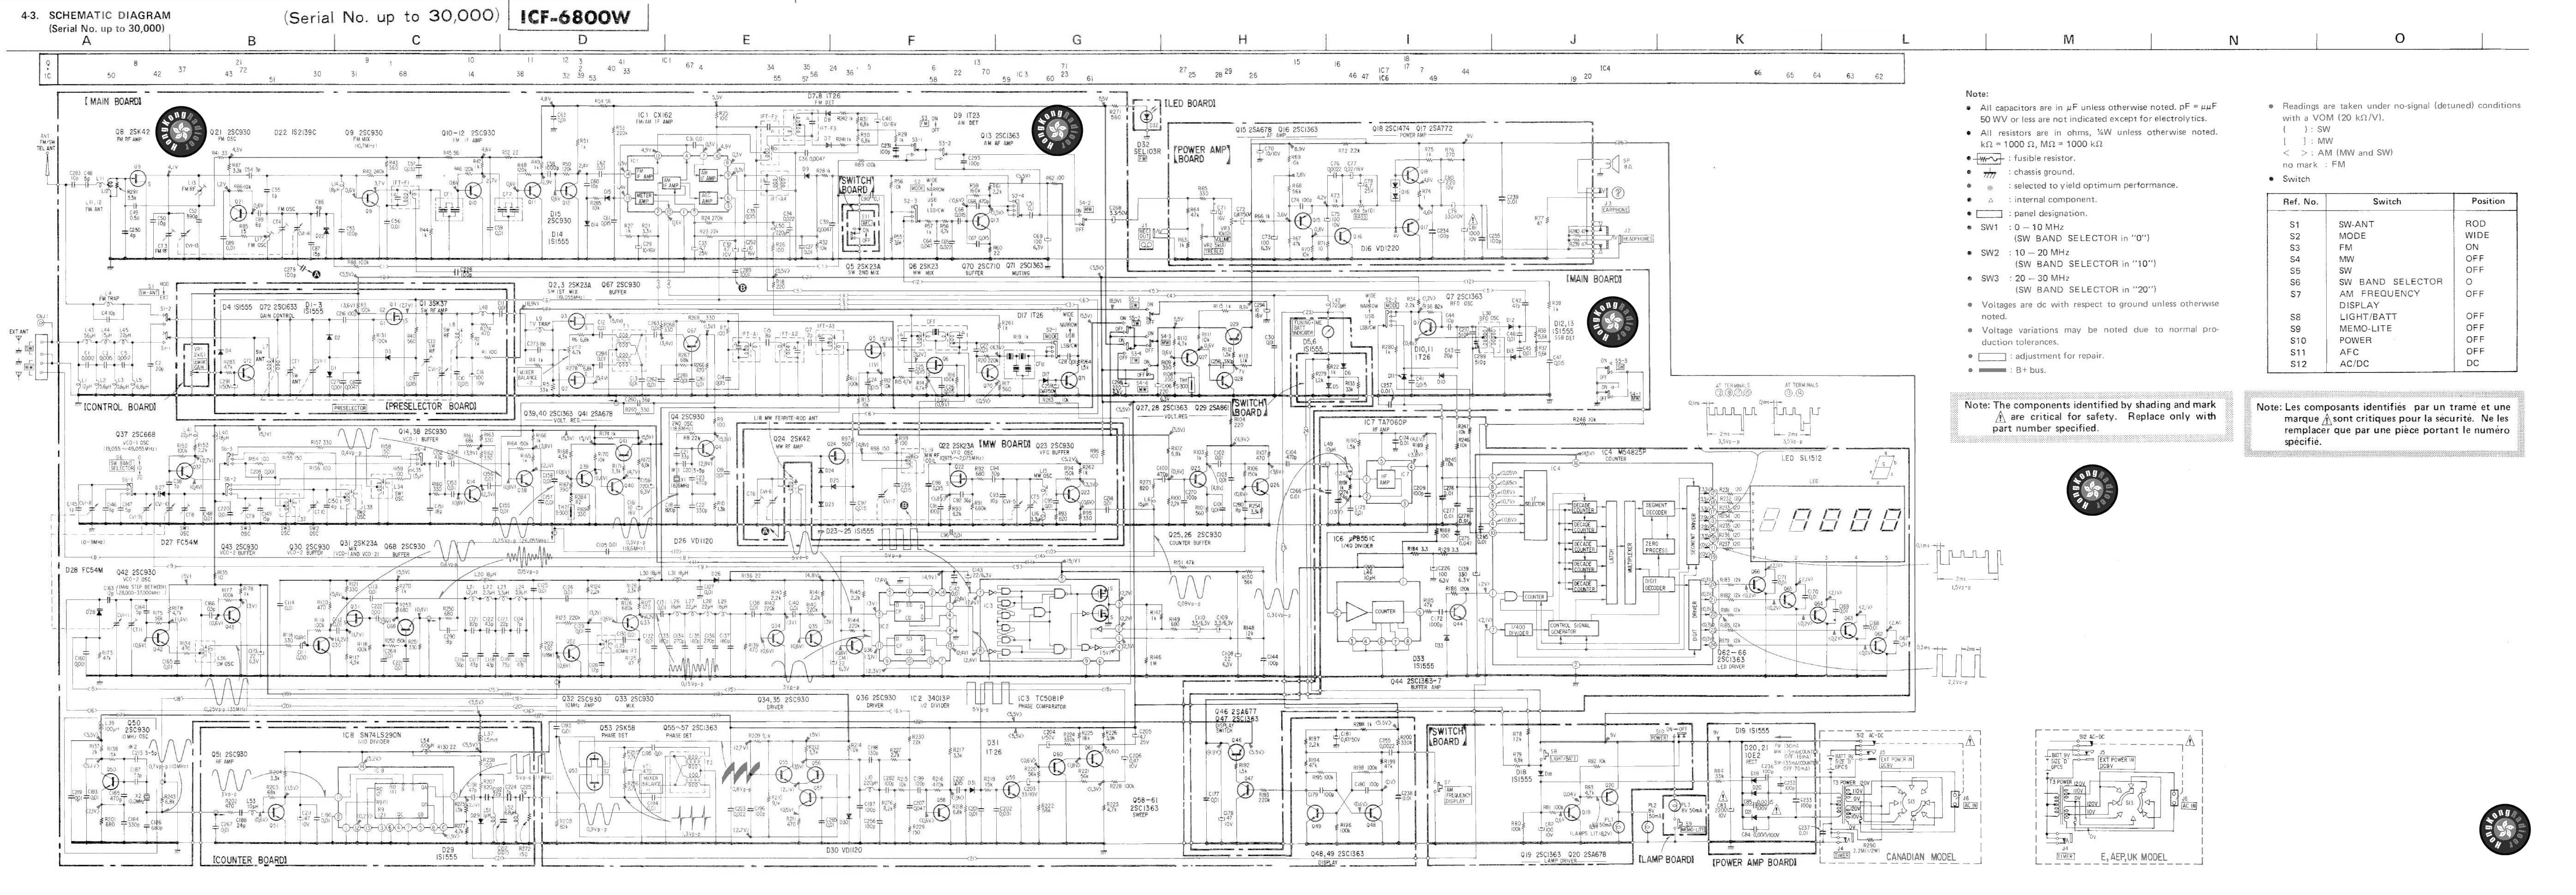 Sony ICF-6800W Schematic for ICF-6800W (pre-30000 model)